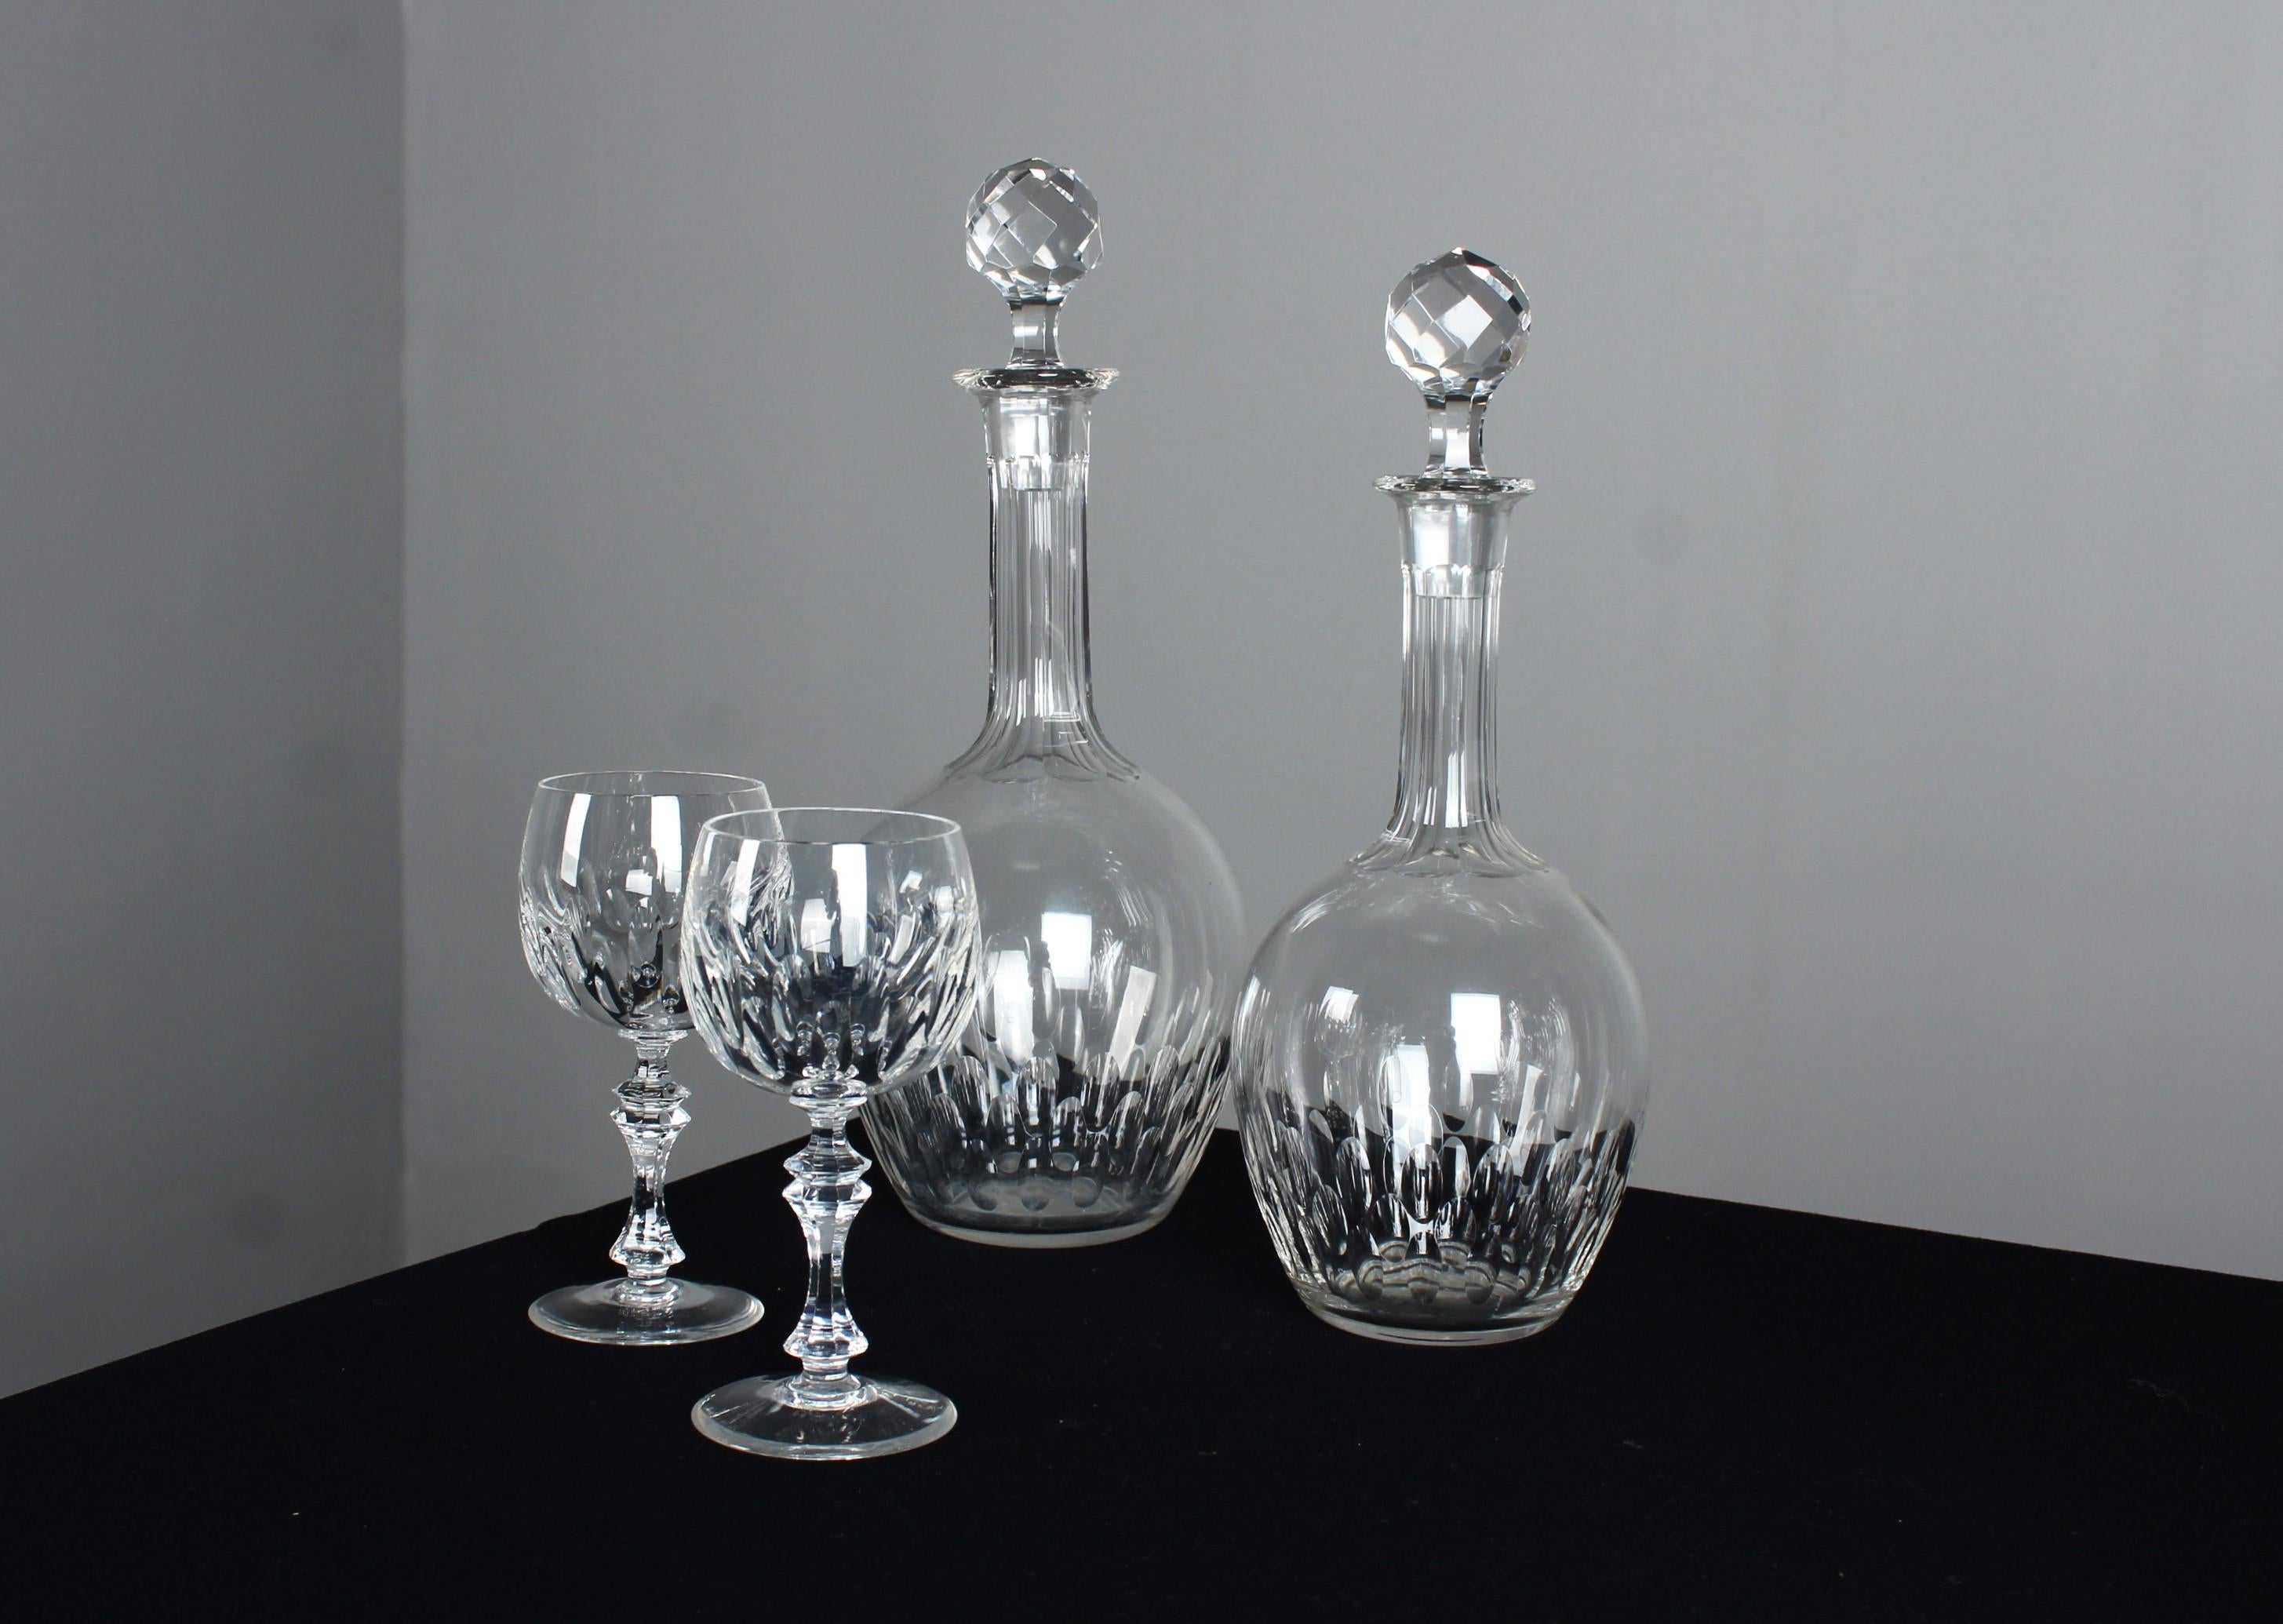 A beautiful set of two antique carafes with two matching liqueur or wine glasses.

In France at the beginning of the 20th century, particularly around 1900, carafes experienced a highlight of elegance and sophistication. This period, often known as